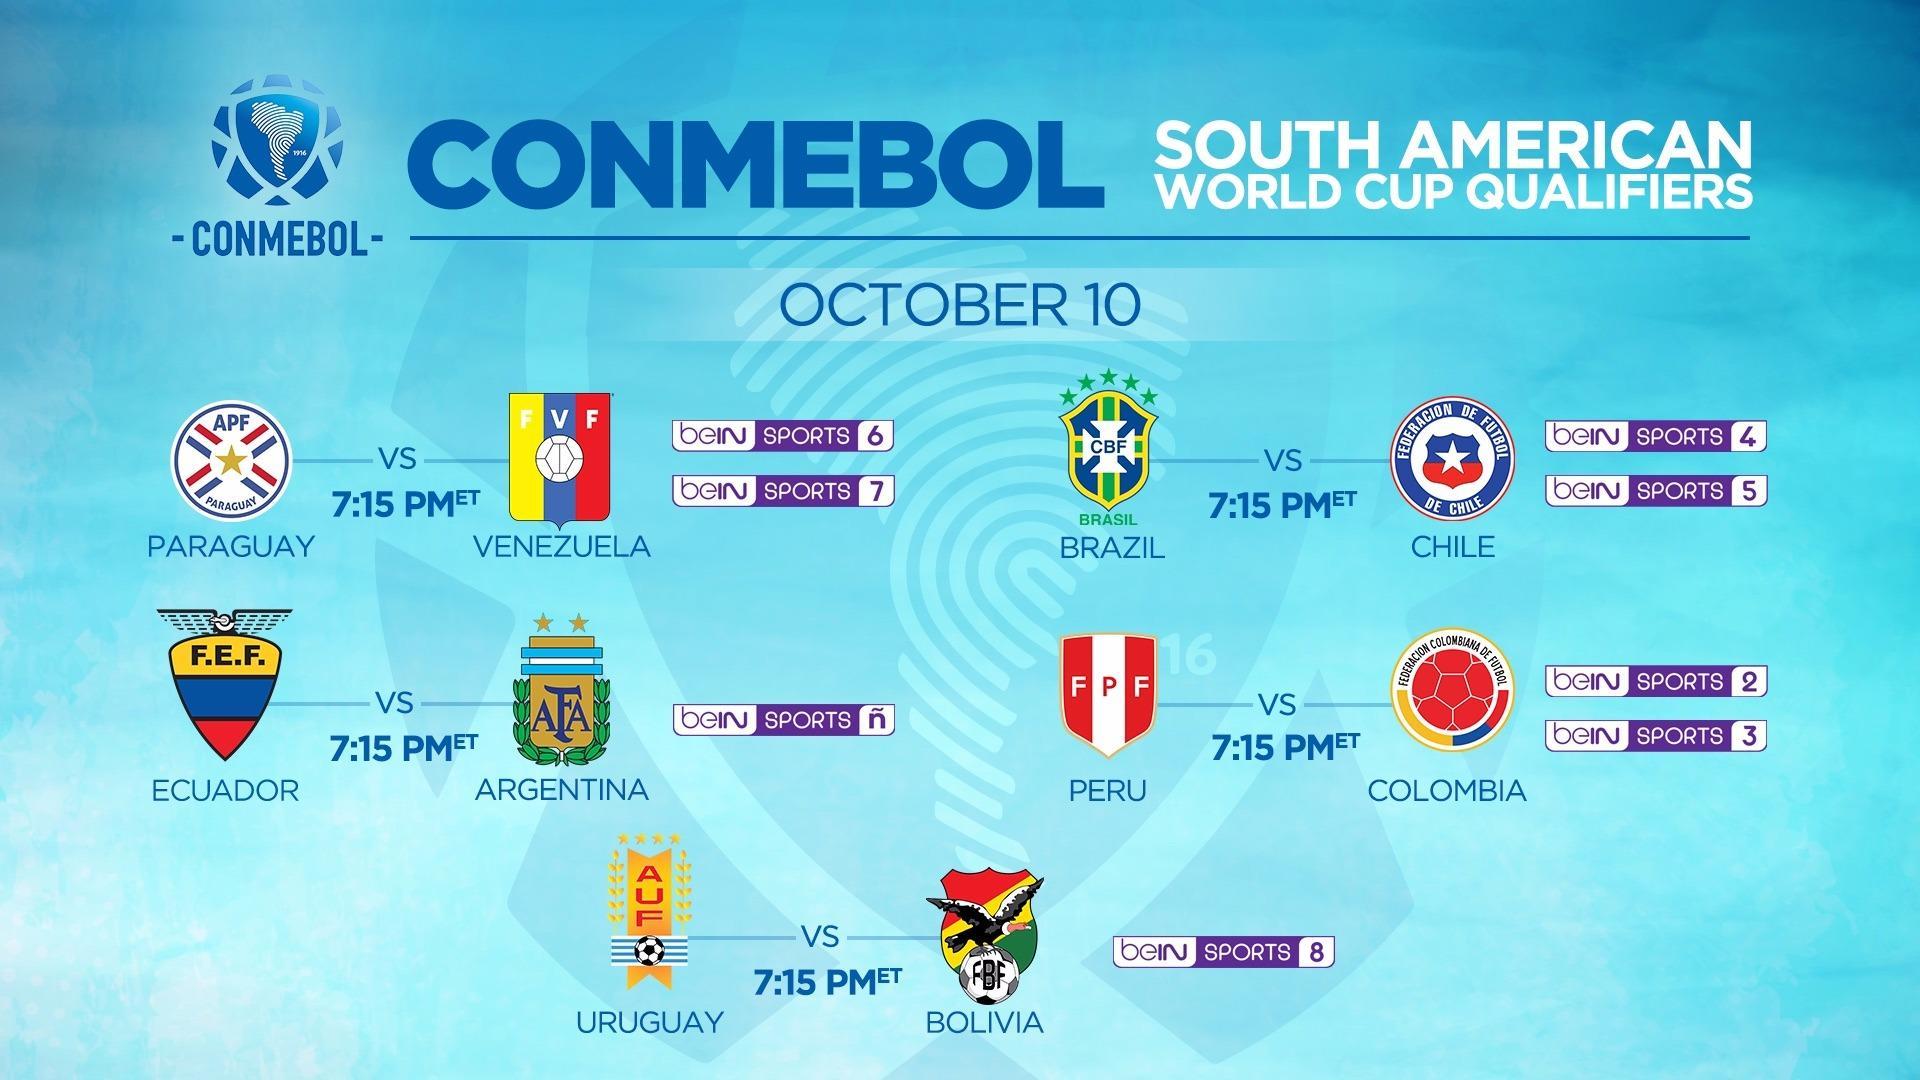 How to Watch CONMEBOL & CONCACAF World Cup Qualifiers on beIN SPORTS